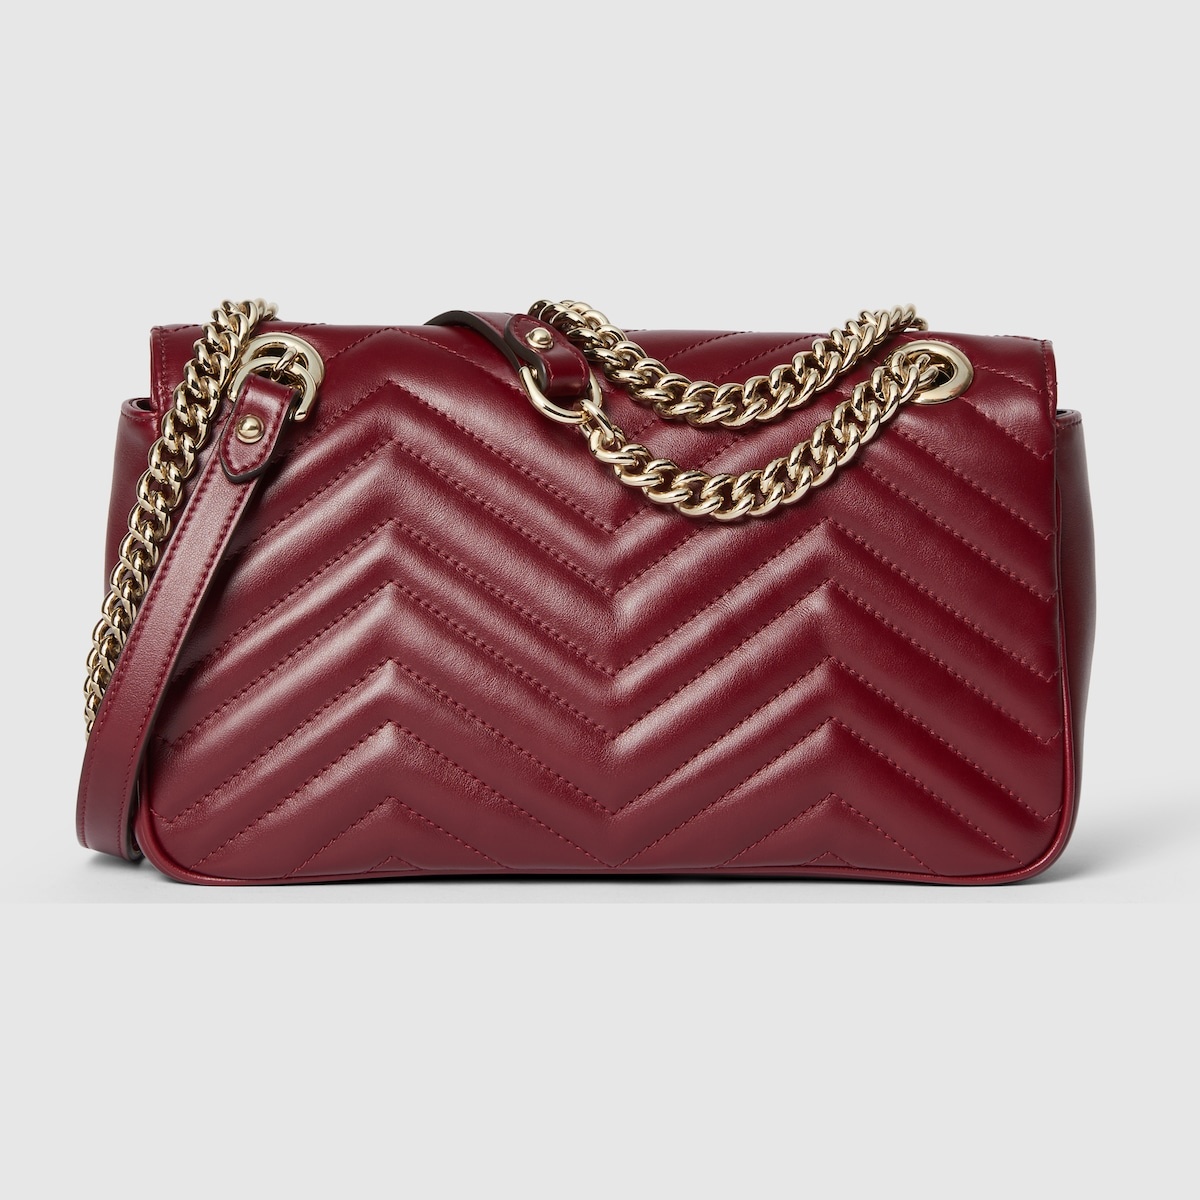 GG Marmont small shoulder bag - 3